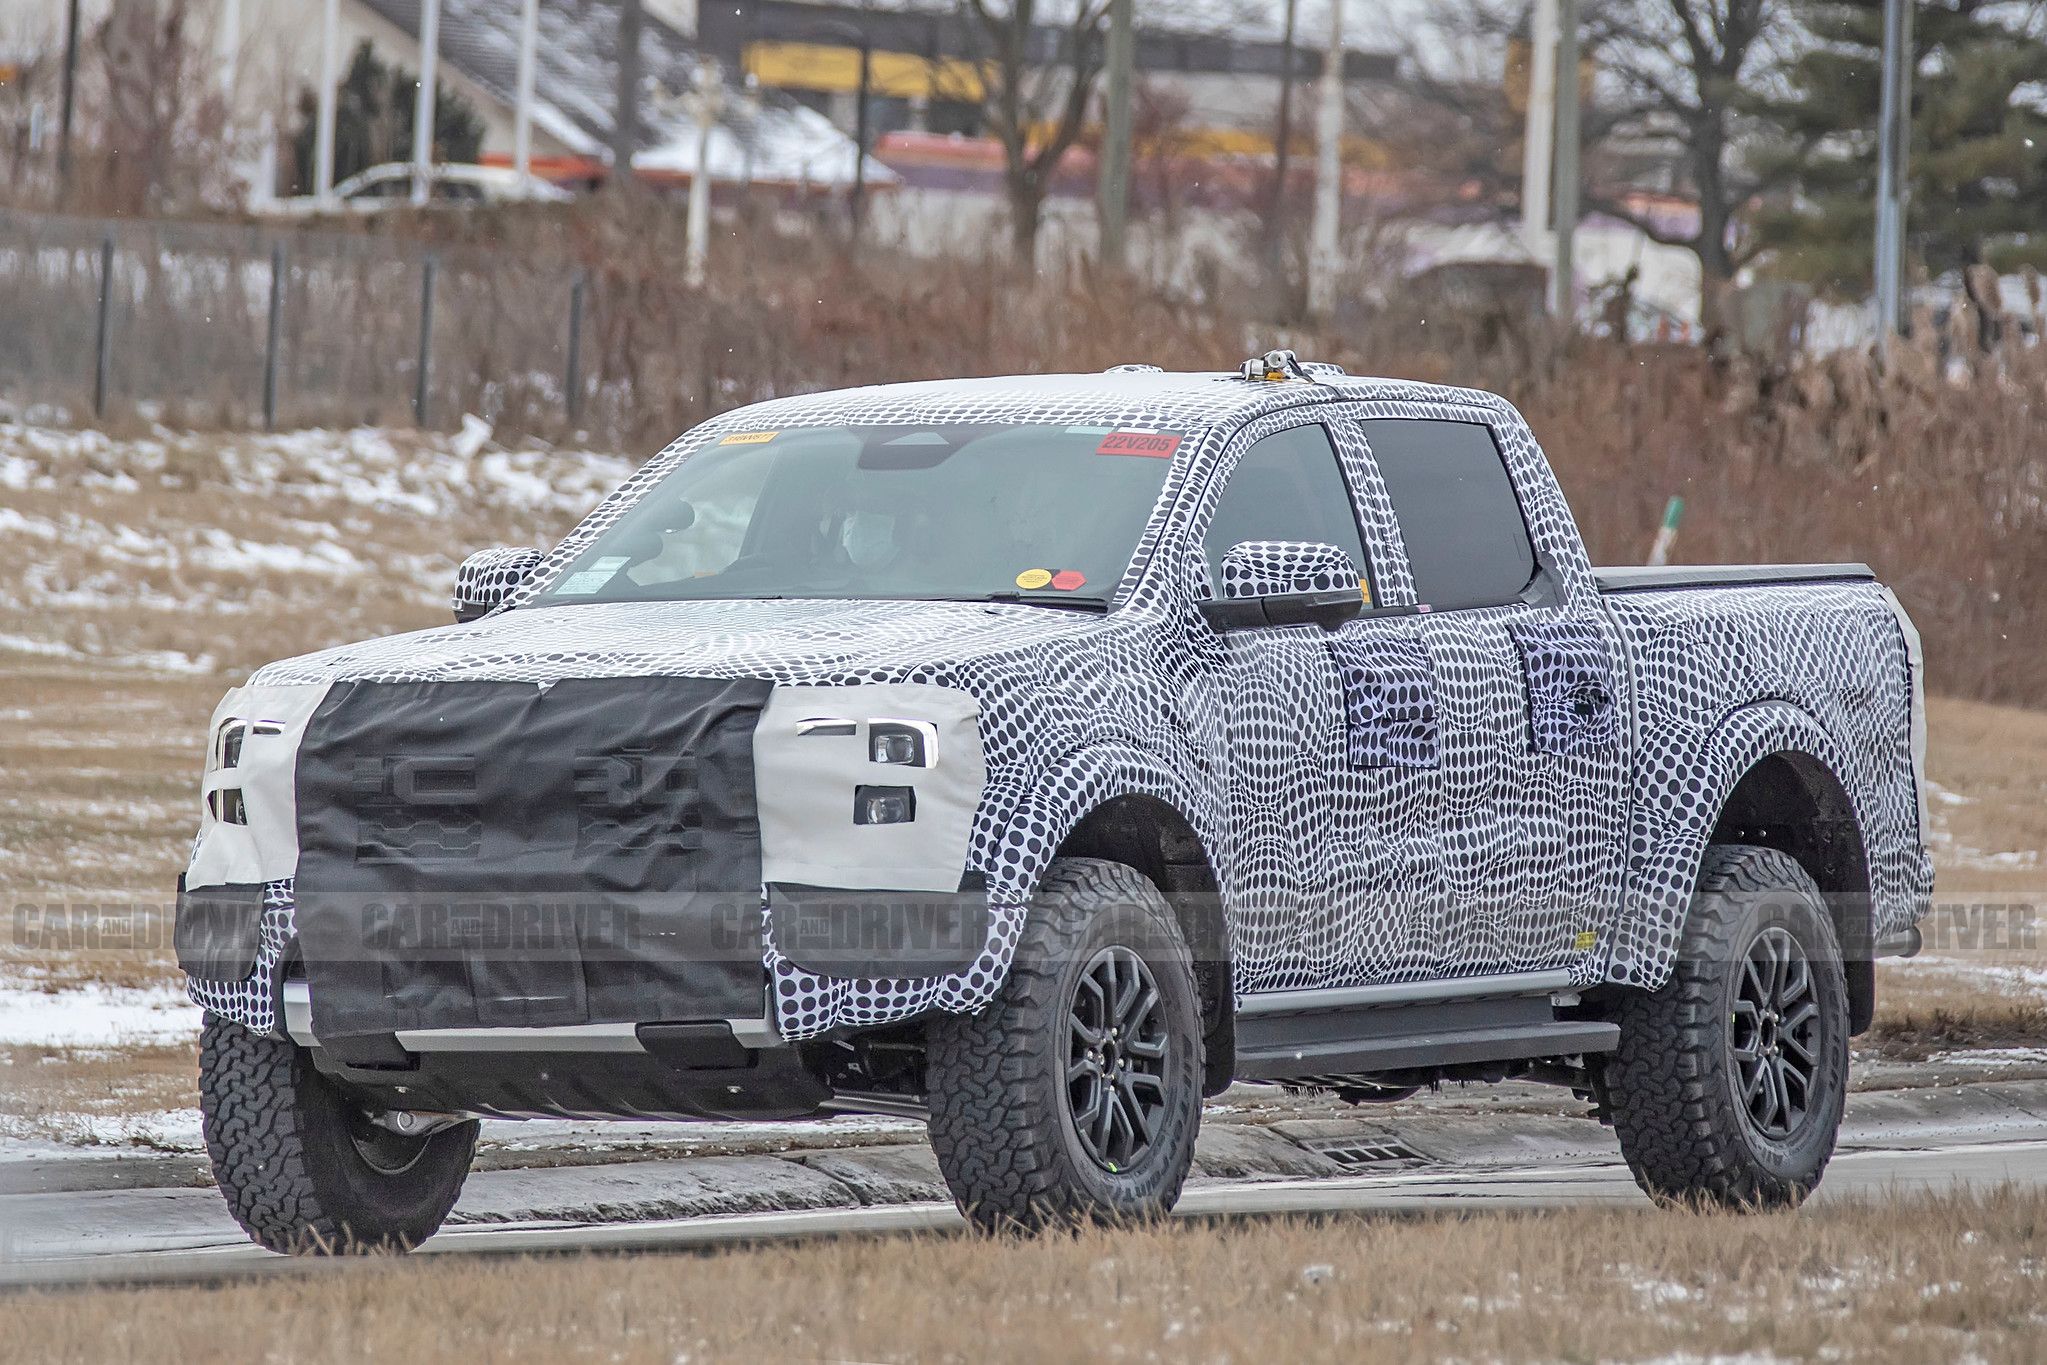 Ford Ranger Next-Generation Pickup Teased for First Time in Video